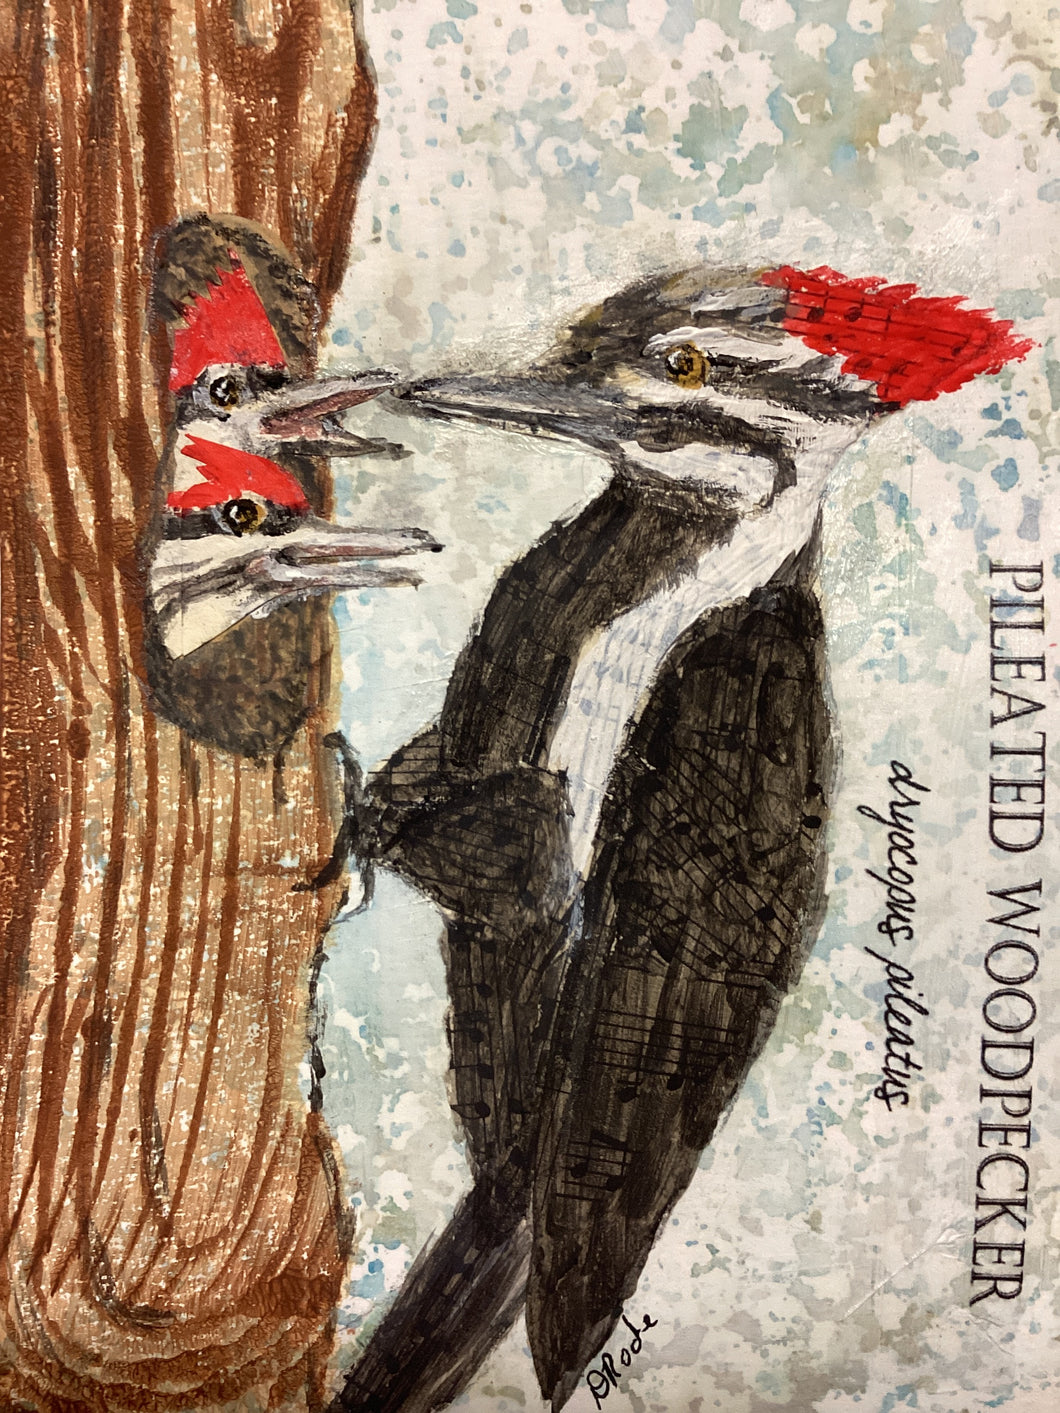 Pileated Woodpecker, 5 x 7 original mixed media painting, Day 31 of 100